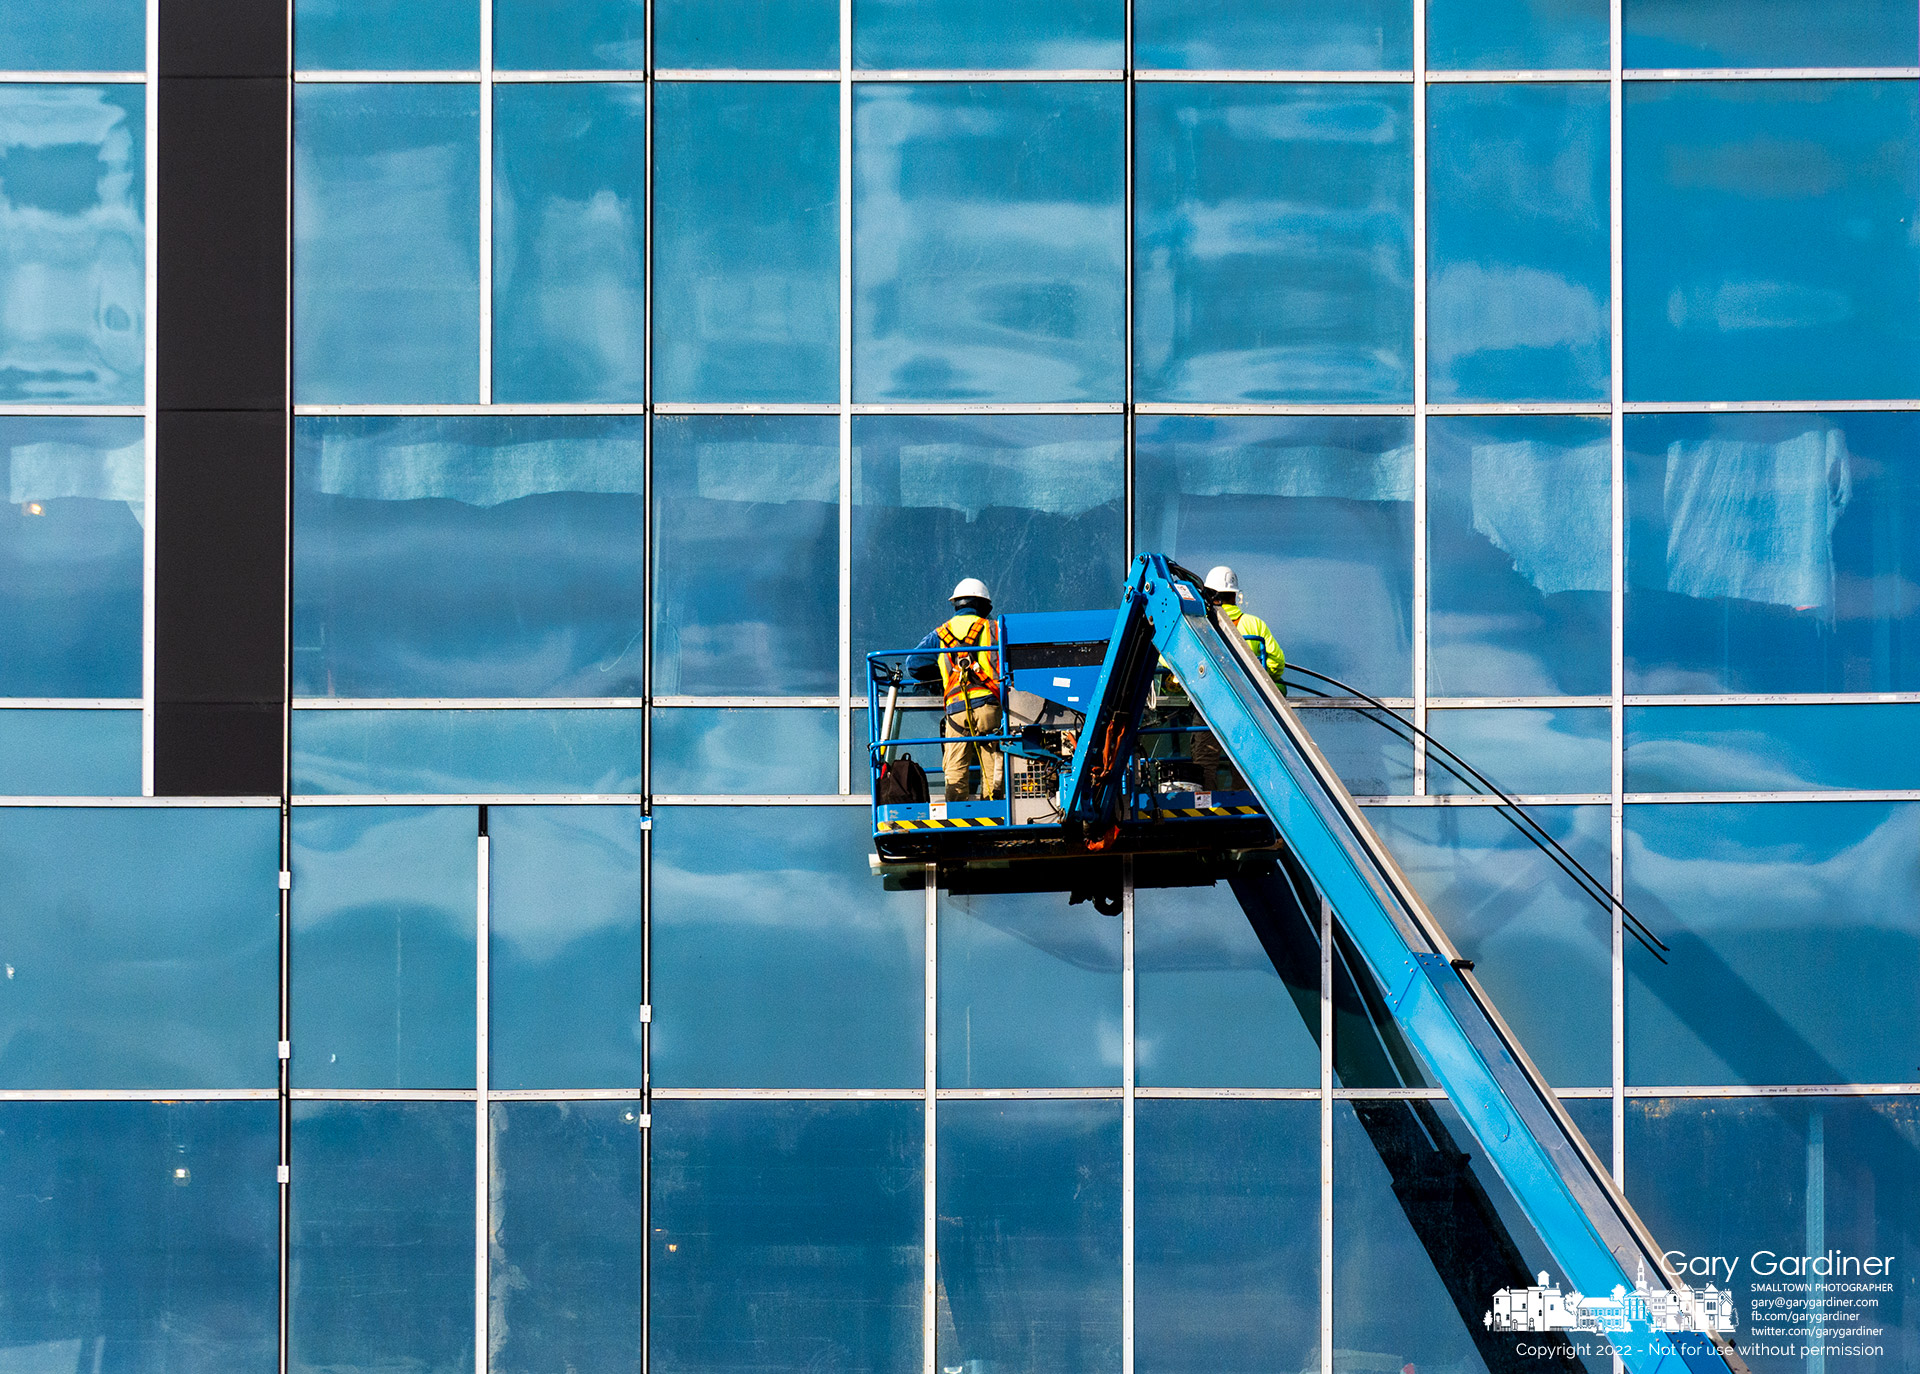 A bright, cloudy sky is reflected in the windows as workmen install seals around the windows of the Ortho One building being built at Africa Road and Polaris Parkway. My final Photo for November 1, 2022.